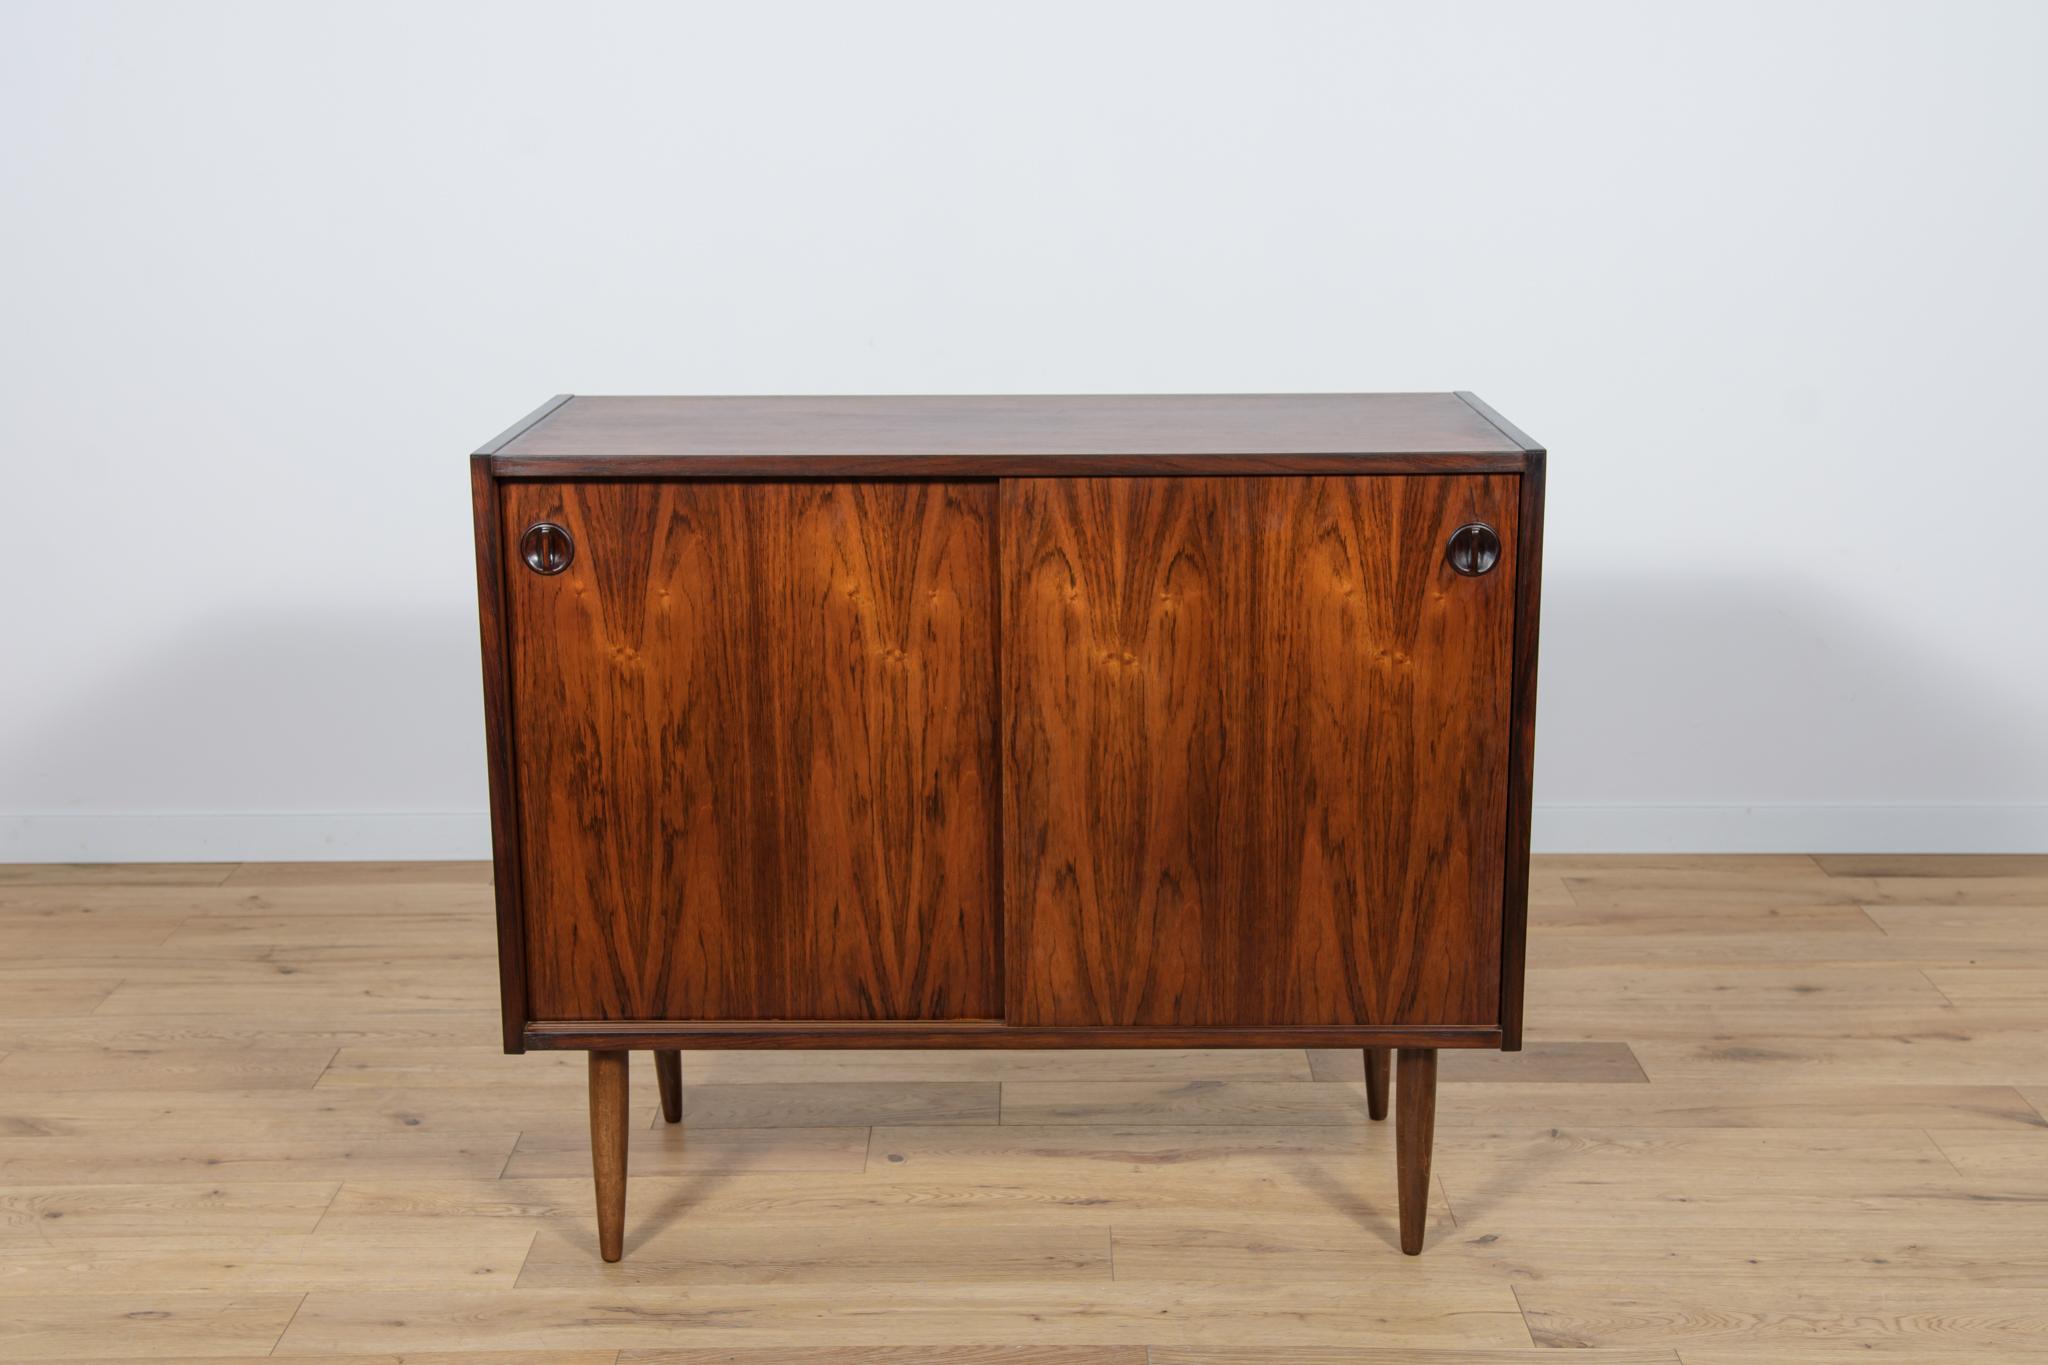 
A small sideboard made of rosewood made in the 1960s in Denmark. Sideboard opened with a two sliding doors.The sideboard has profiled rosewood handles. There are shelves inside the sideboard. The sideboard has been completely renovated. It has been